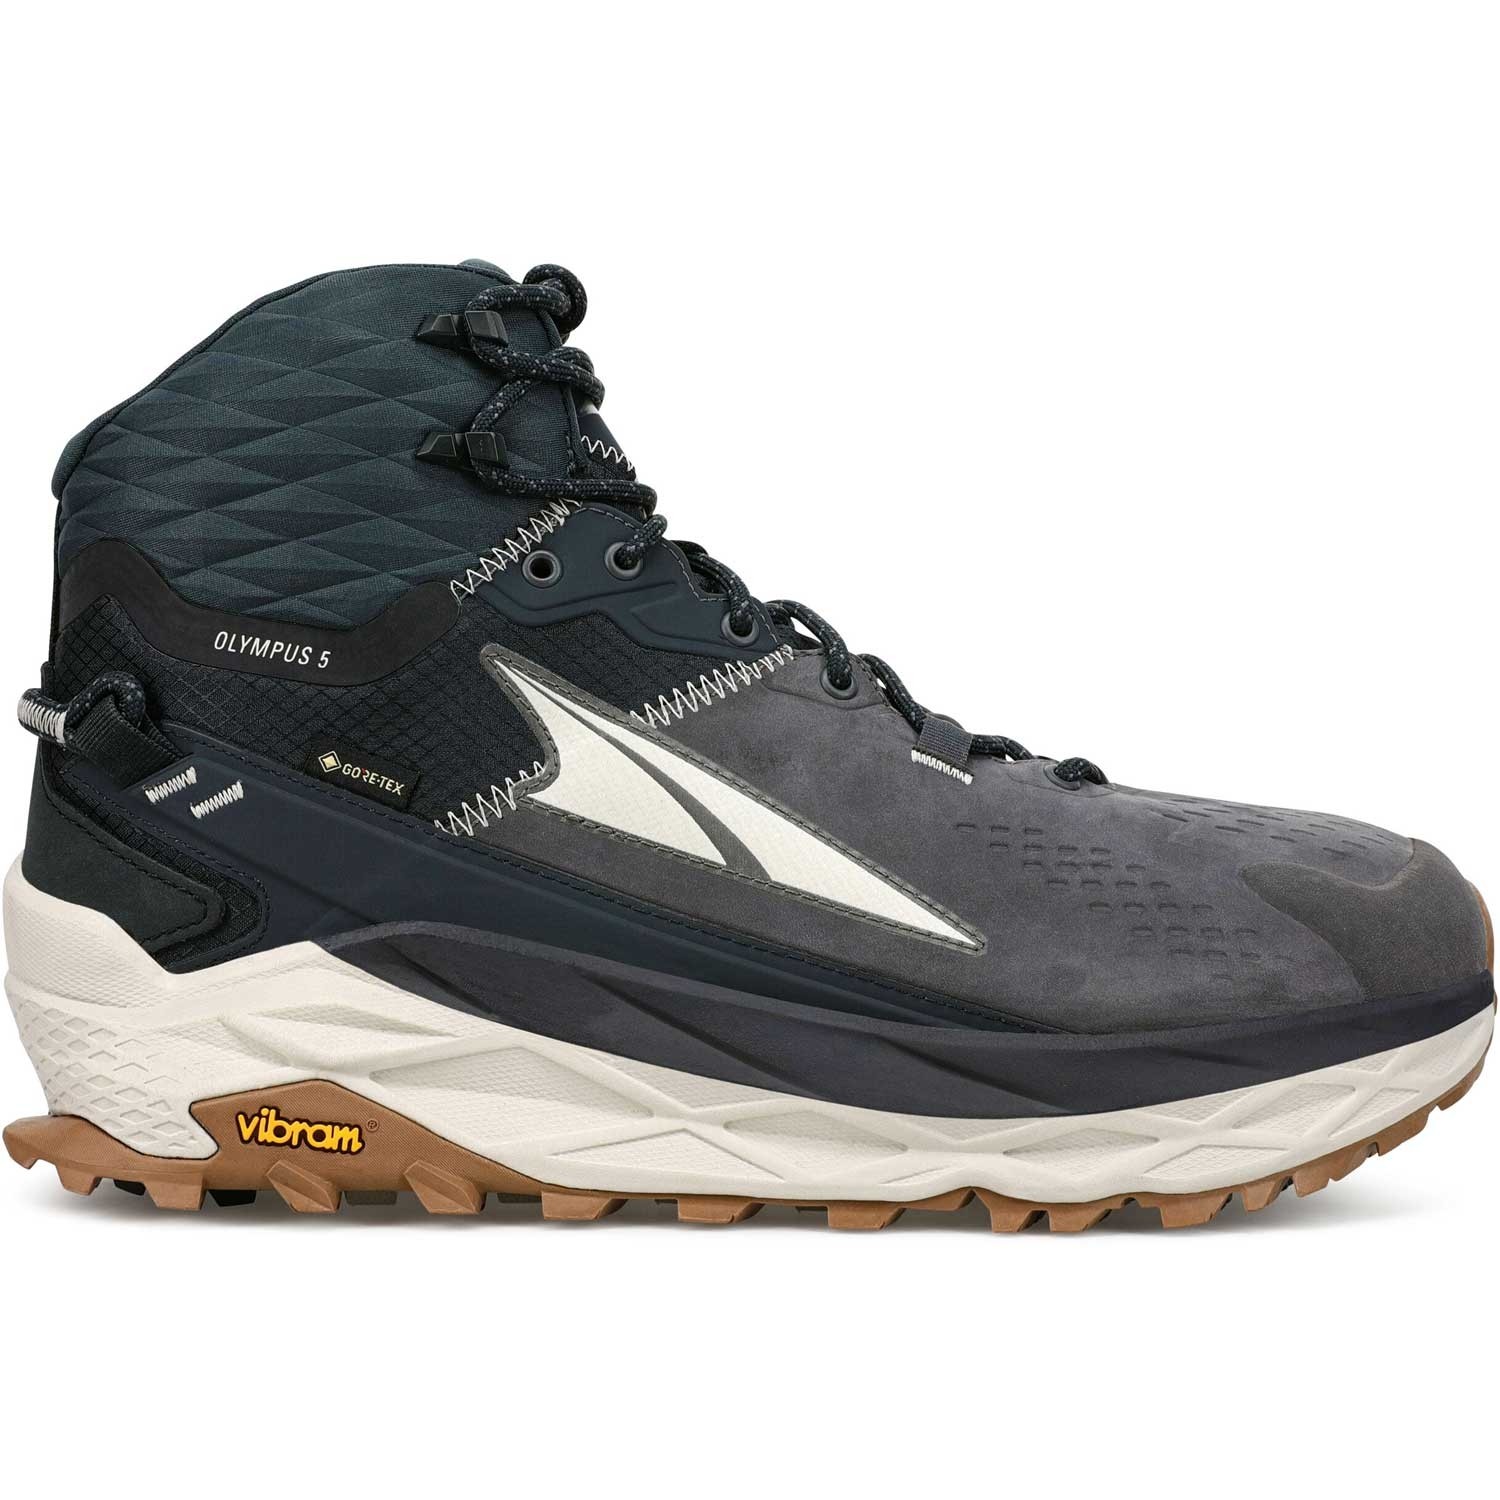 Altra Olympus 5 Hike Mid Gore-Tex - Men's Hiking Boot | Outside.co.uk